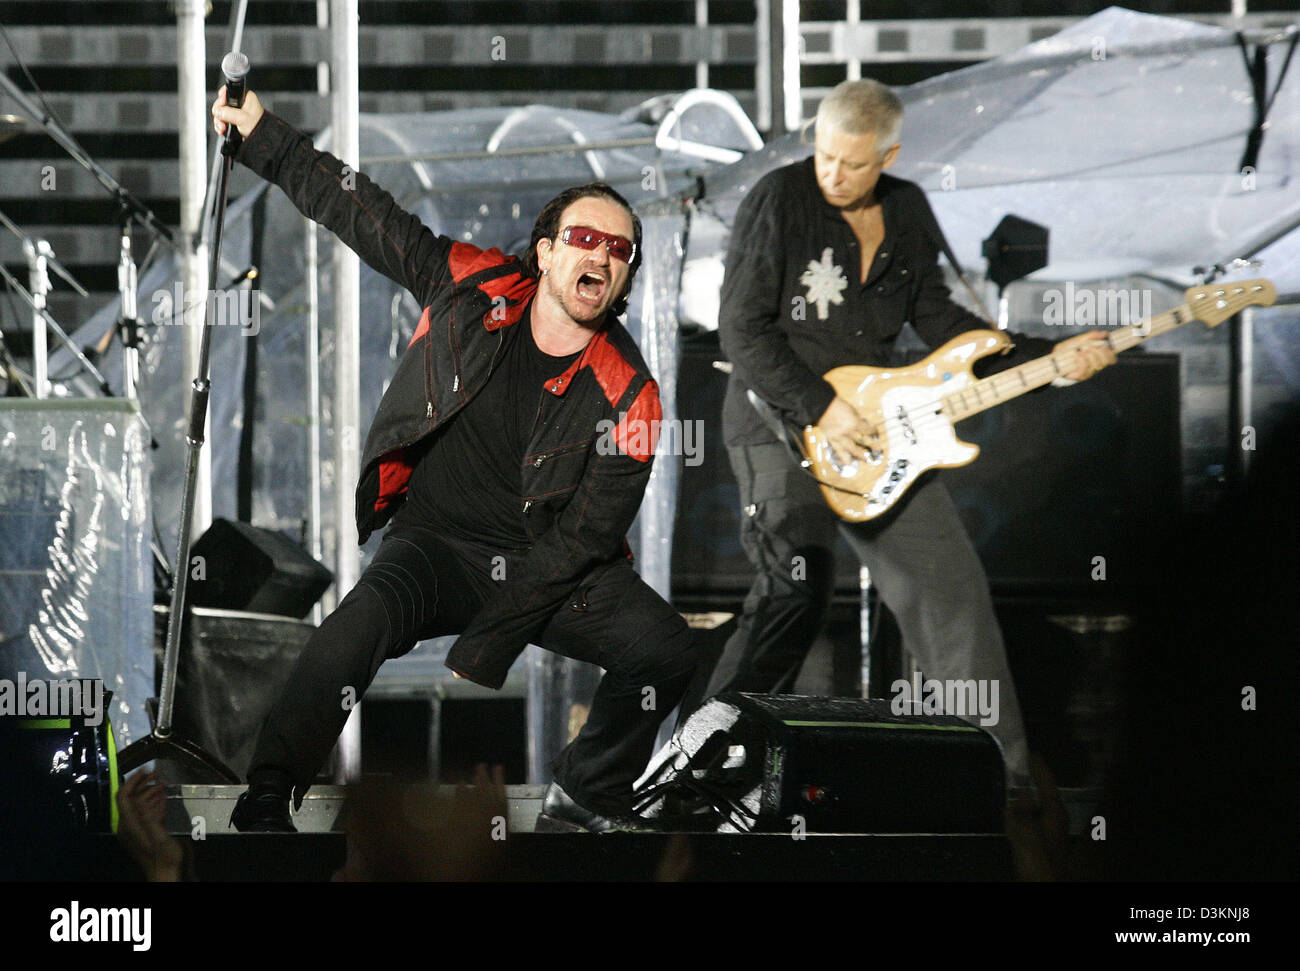 (dpa) - Bono (L), lead singer of the Irish pop band U2 performs on stage at the Olympiastadium in Munich, Germany, 03 August 2005. U2 concluded their tour through Germany with the concert in the Bavarian capital, promoting their album 'Vertigo'. They previously performed in Gelsenkirchen and Berlin. The more than 190,000 tickets of U2's Vertigo tour were sold out within the first t Stock Photo